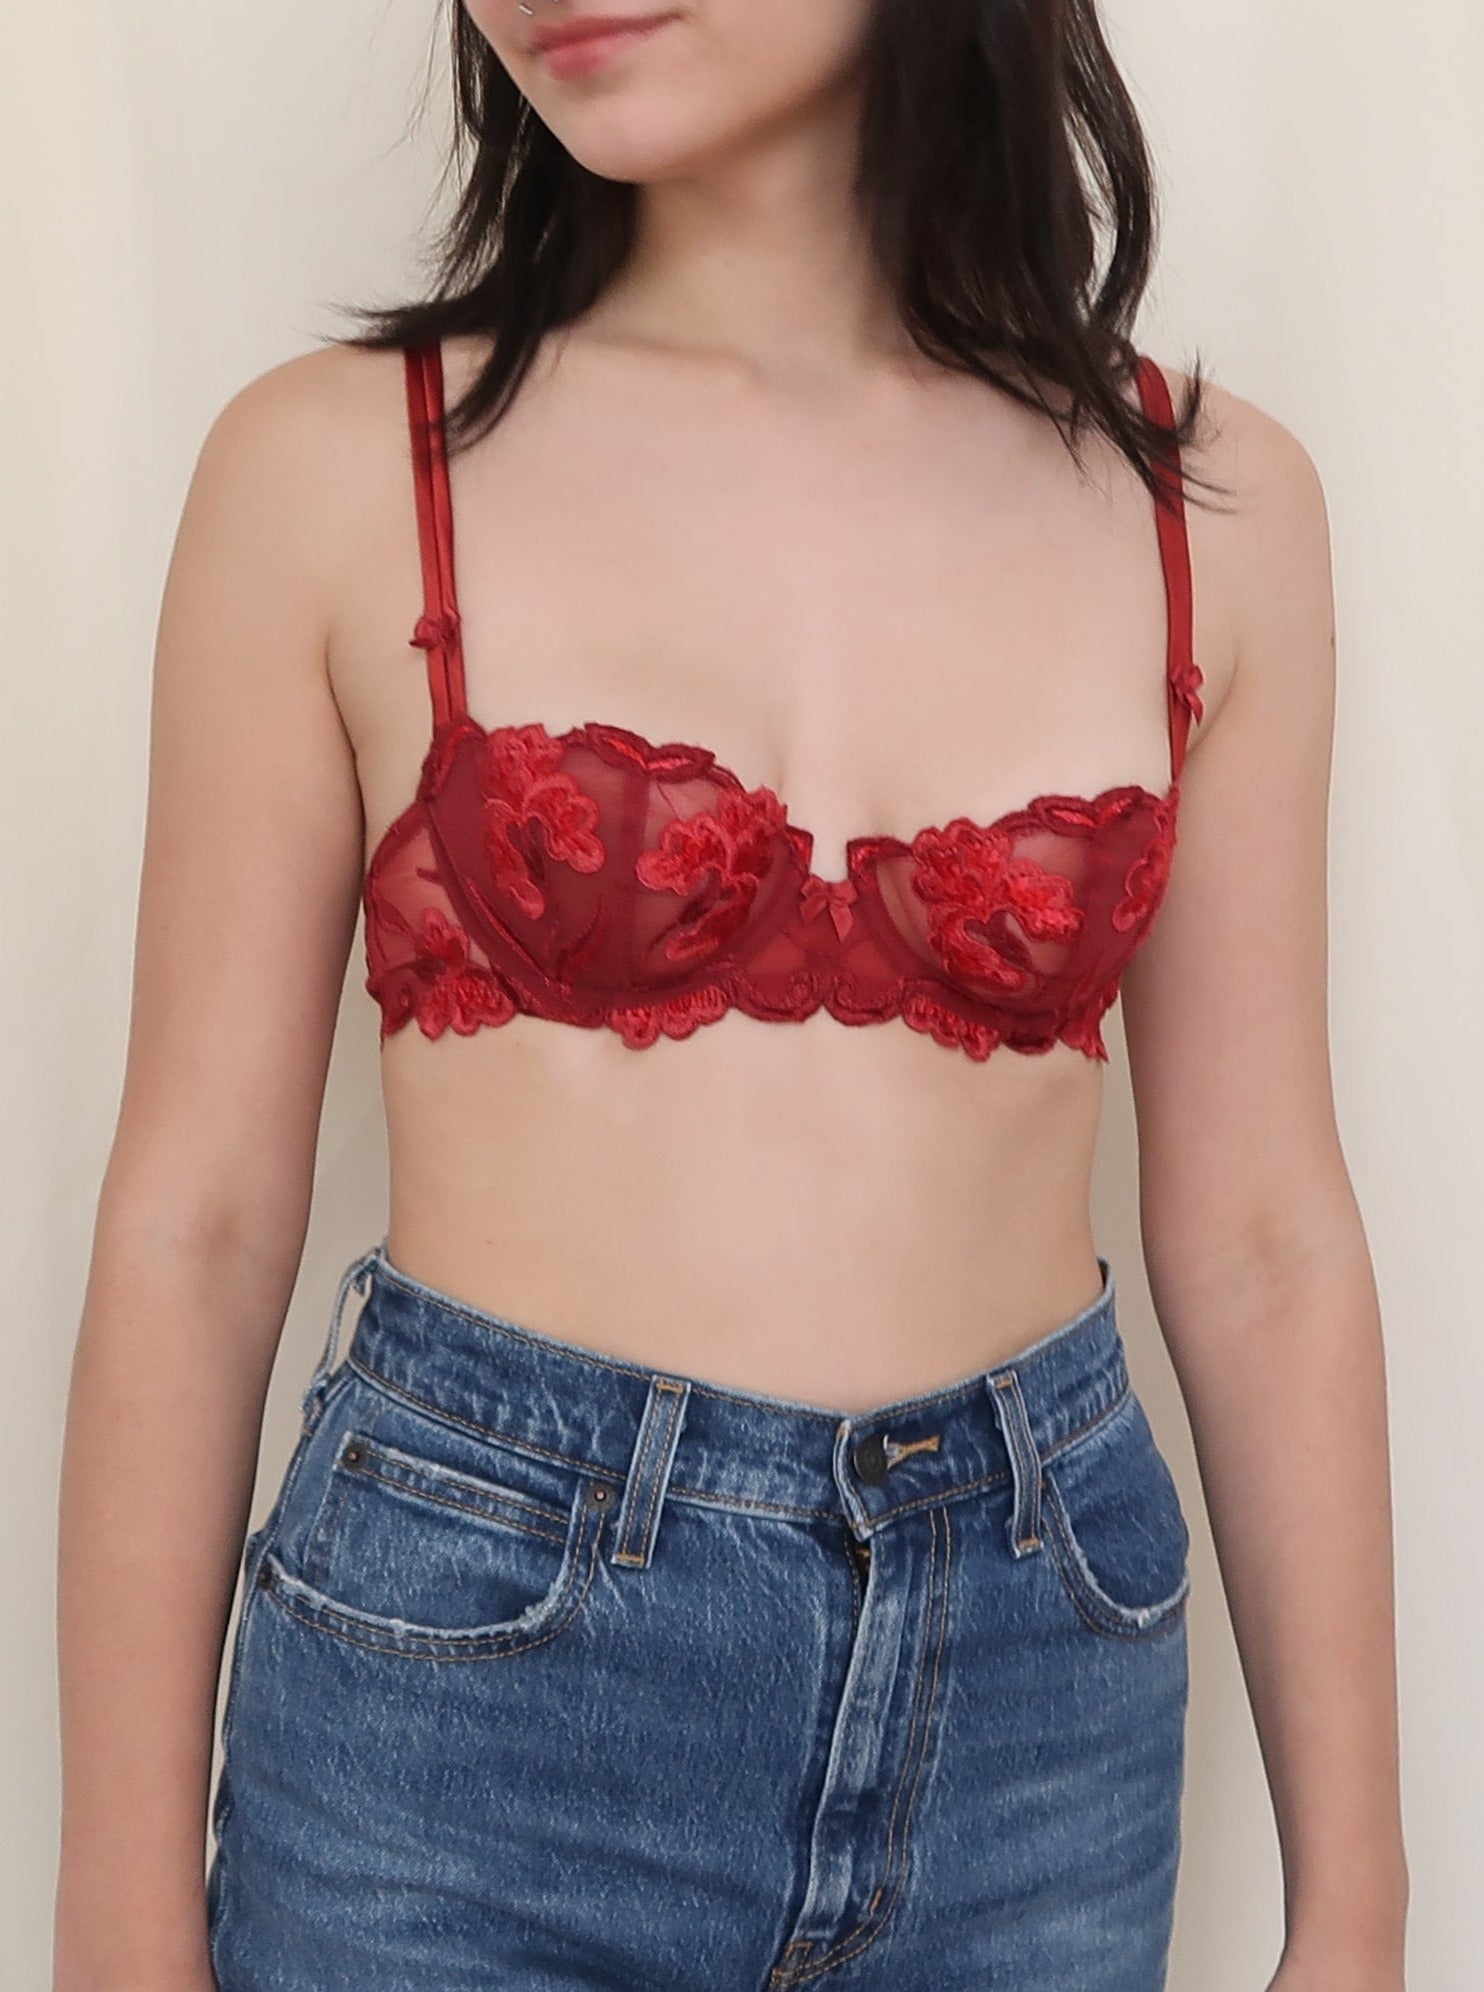 32b Bras, Shop The Largest Collection